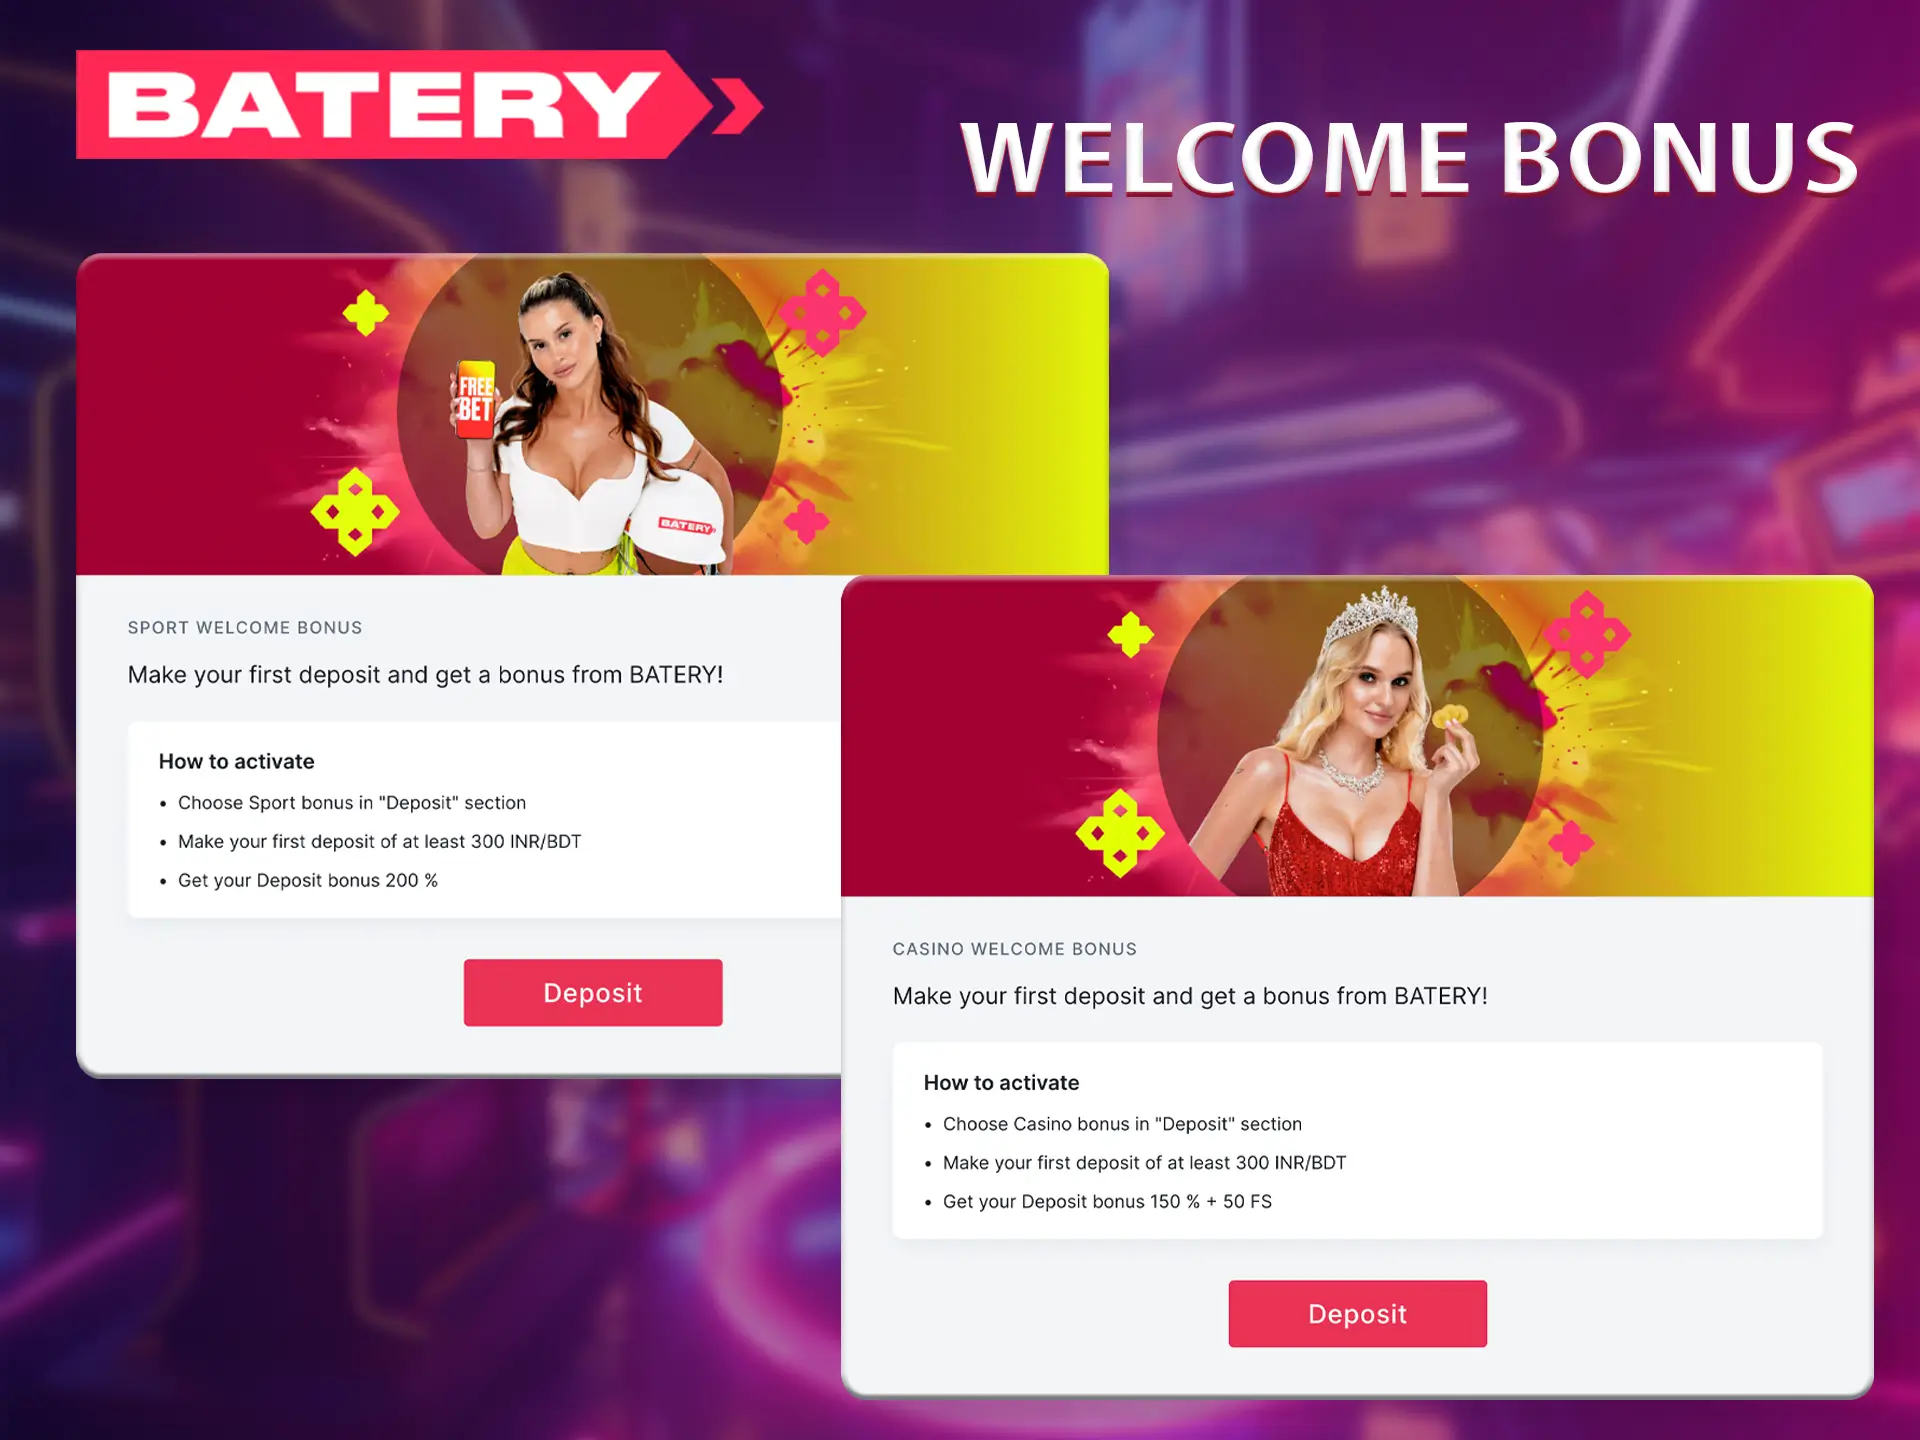 Batery casino bonuses allow the player to start their journey confidently and without fear of loss.